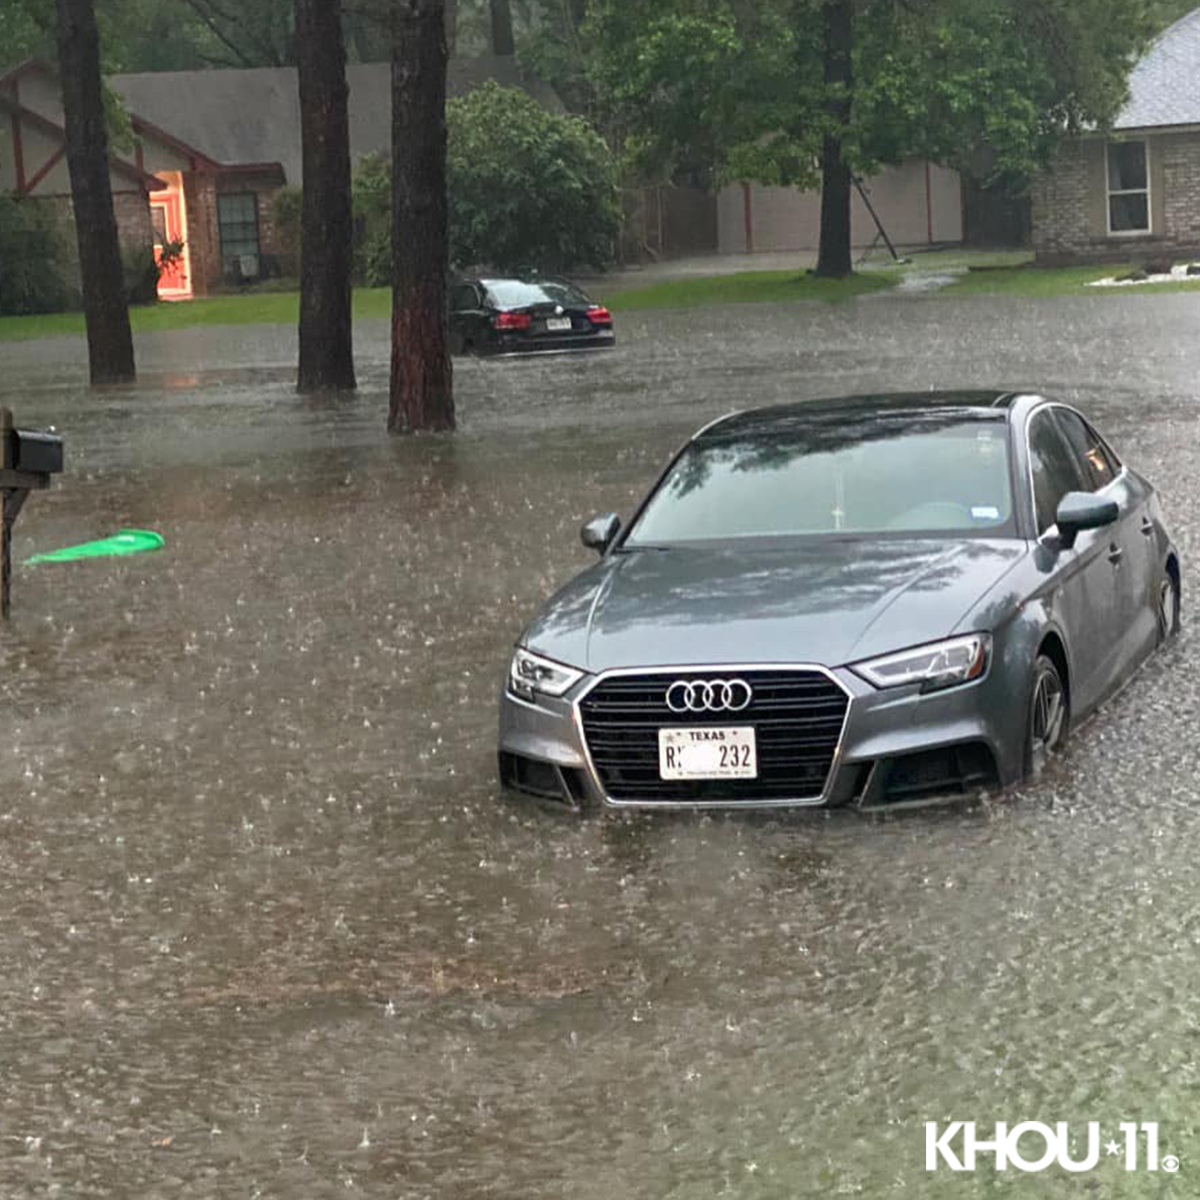 We're getting reports of high water. This photo was shared with us by Kevin LaFreniere in the North Woodland Hills neighborhood in the Kingwood area. Share photos with us through the Near Me feature of our news app, but don't put yourself in danger! KHOU.com/app